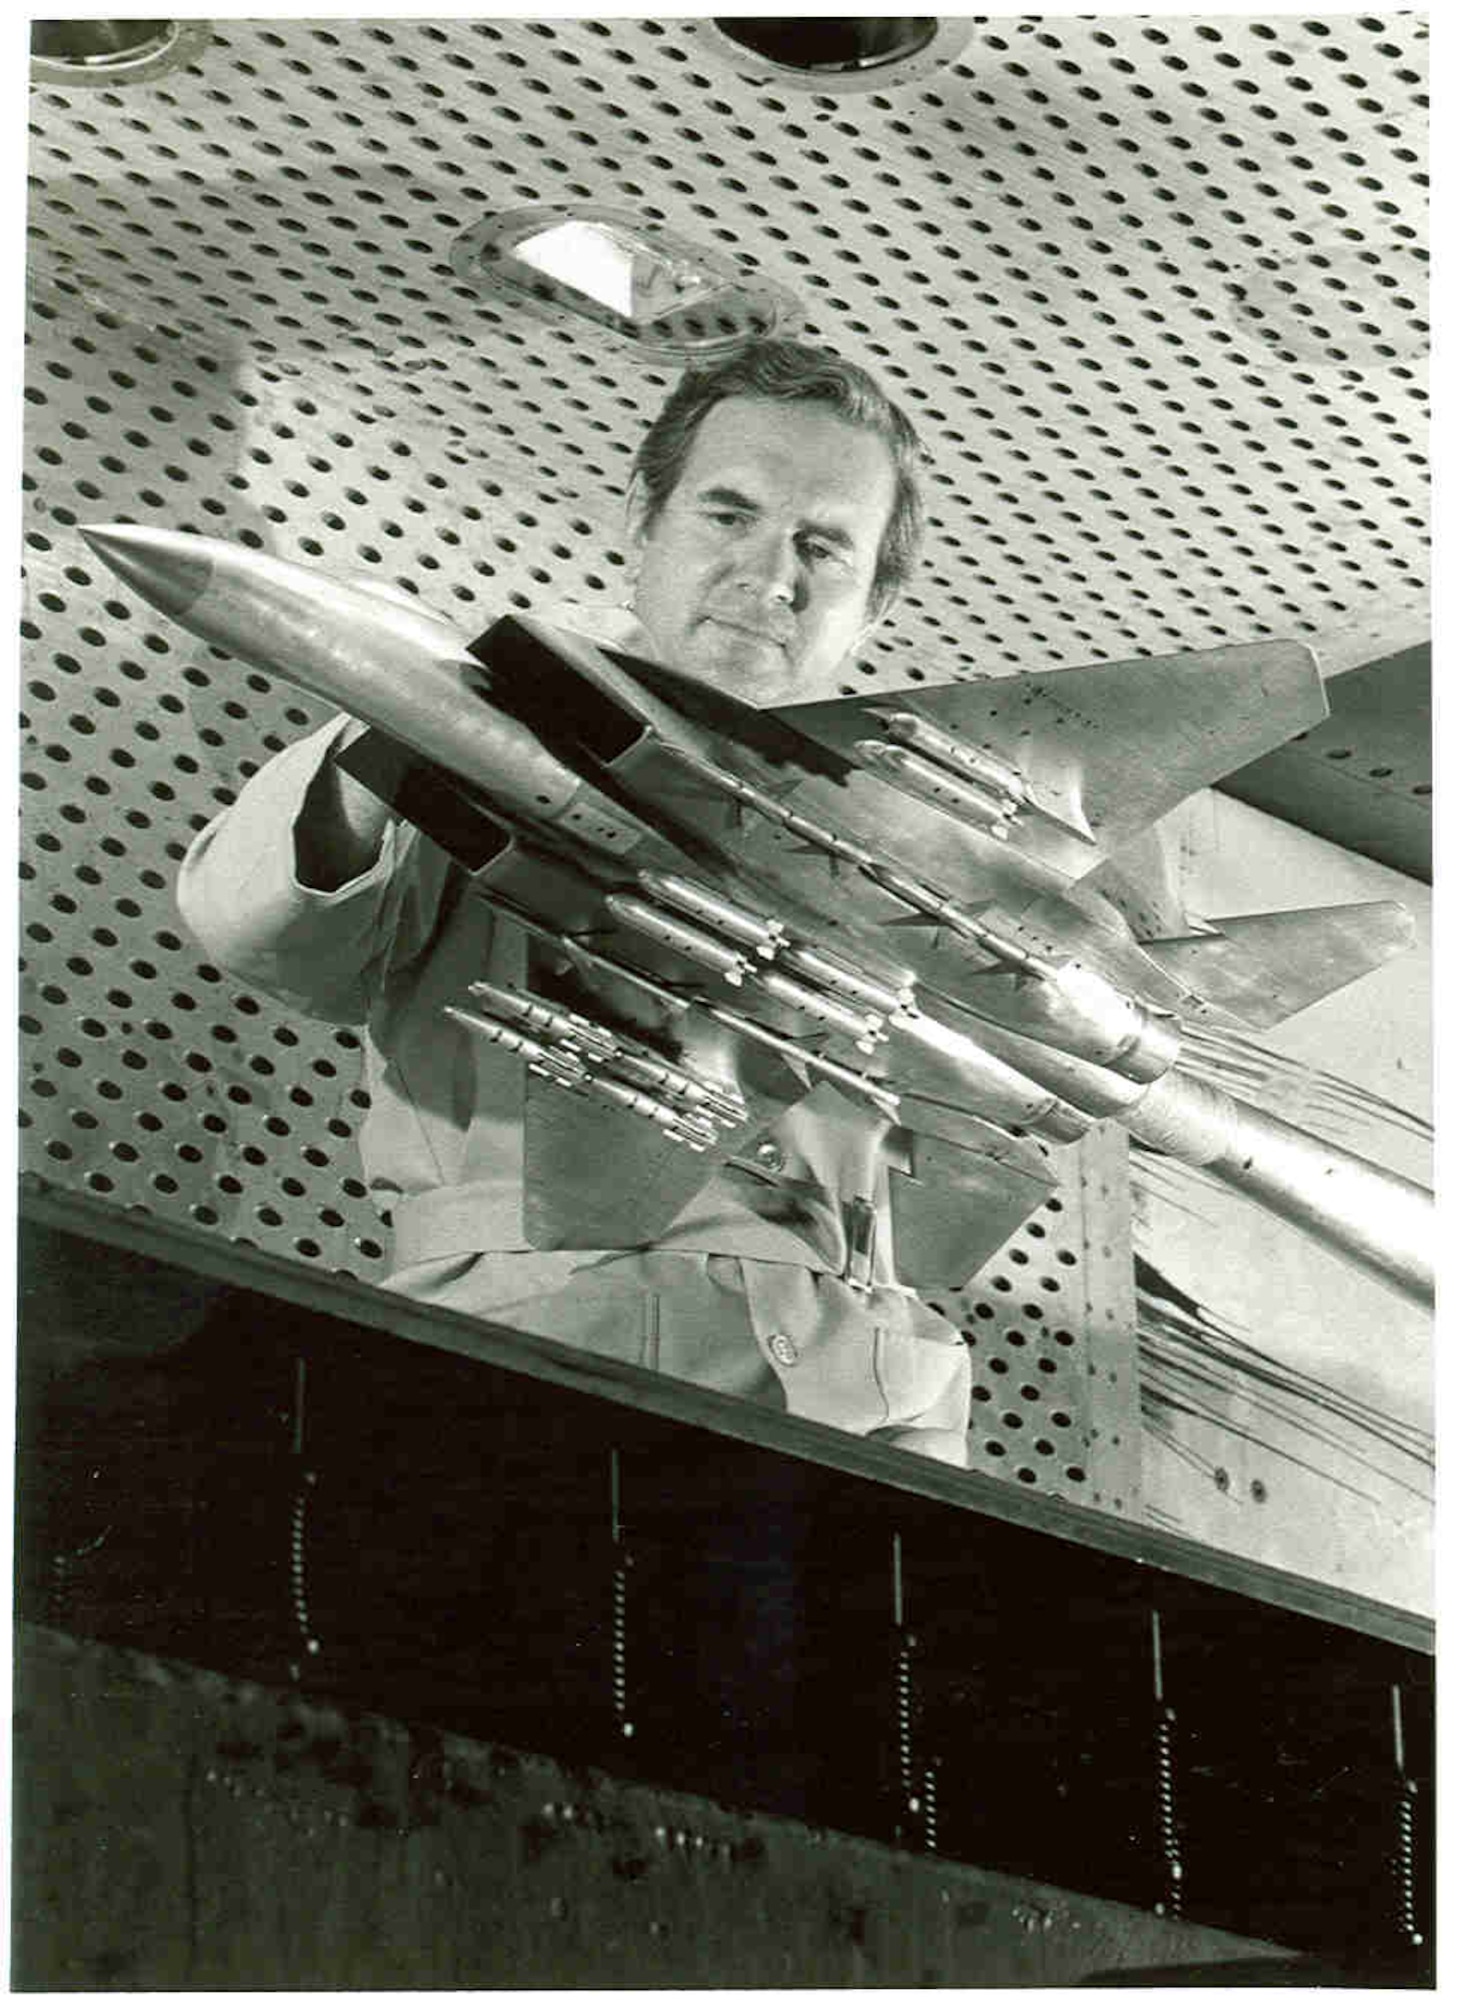 Test facility craftsman and electrician Don Pugh prepares a scale model of the F-15 Eagle in 1978 for aerodynamic load testing in the 4-foot transonic wind tunnel at Arnold Air Force Base, Tennessee, headquarters of Arnold Engineering Development Complex. The Air Force recently celebrated the 50th anniversary of the F-15’s deployment. Models of the aircraft, engines and other F-15 components have frequently been tested by AEDC over the past 50 years. (U.S. Air Force photo)